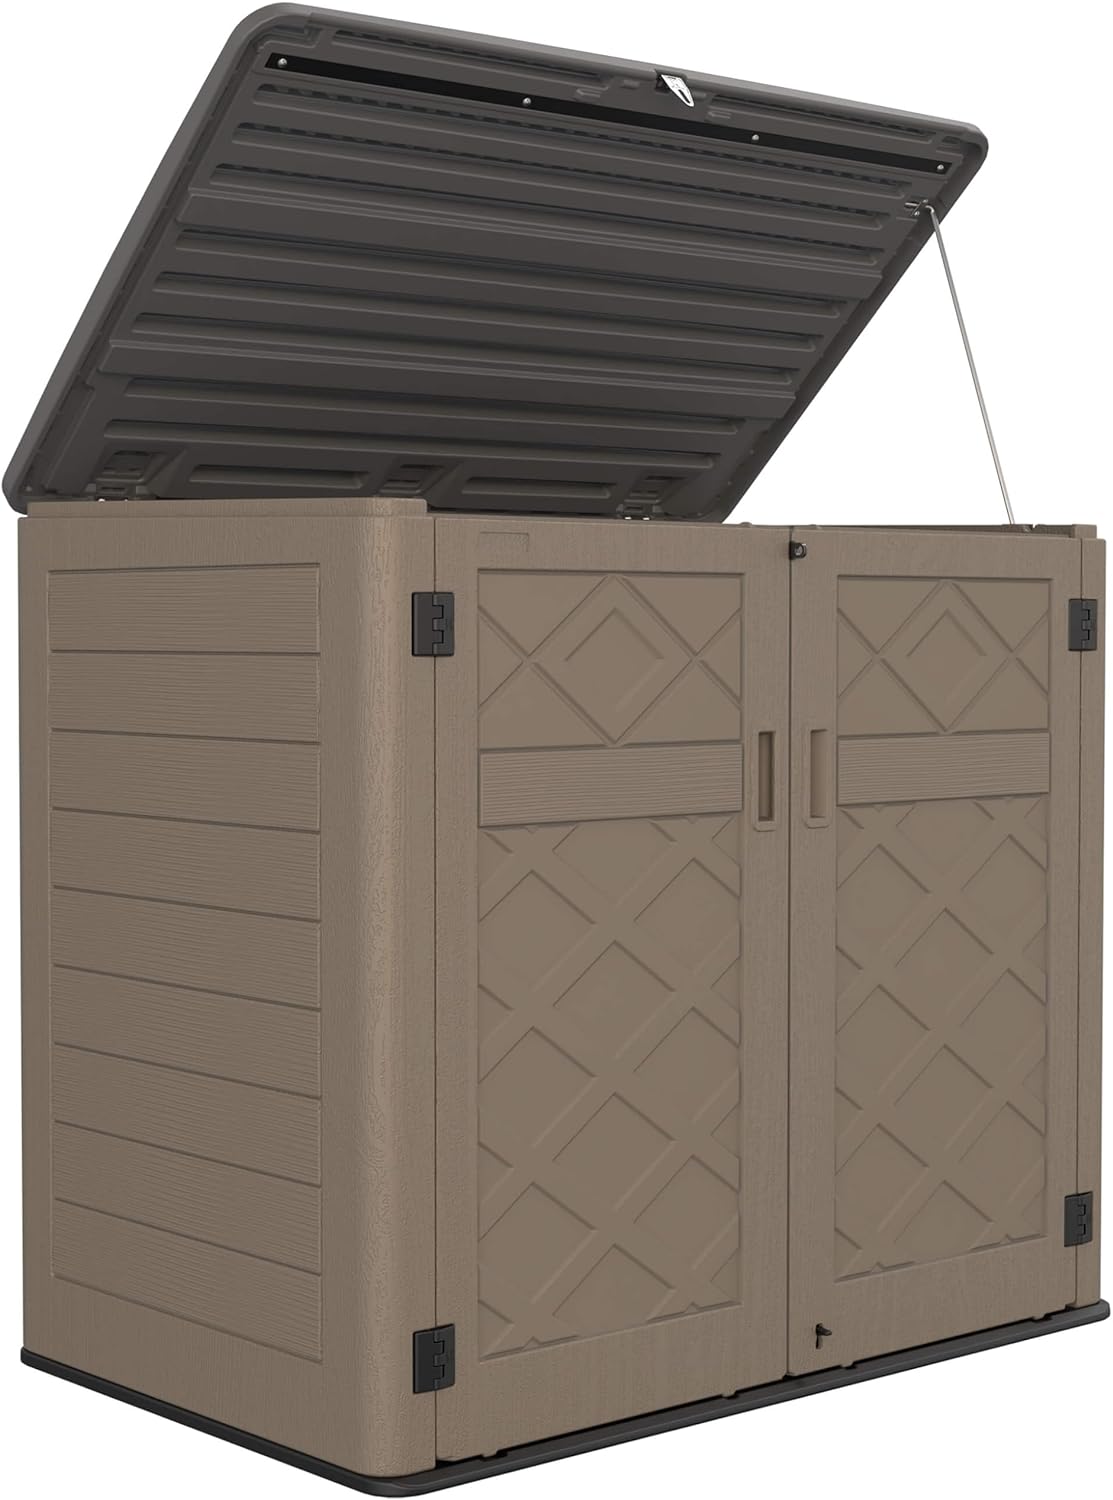 HOMSPARK Larger Outdoor Storage shed, 48 Cu.ft Outdoor Storage Box Waterproof, Outdoor Storage Cabinet for Bike, Garbage Cans, Lawnmower, Garden Accessories, Waterproof, Lockable